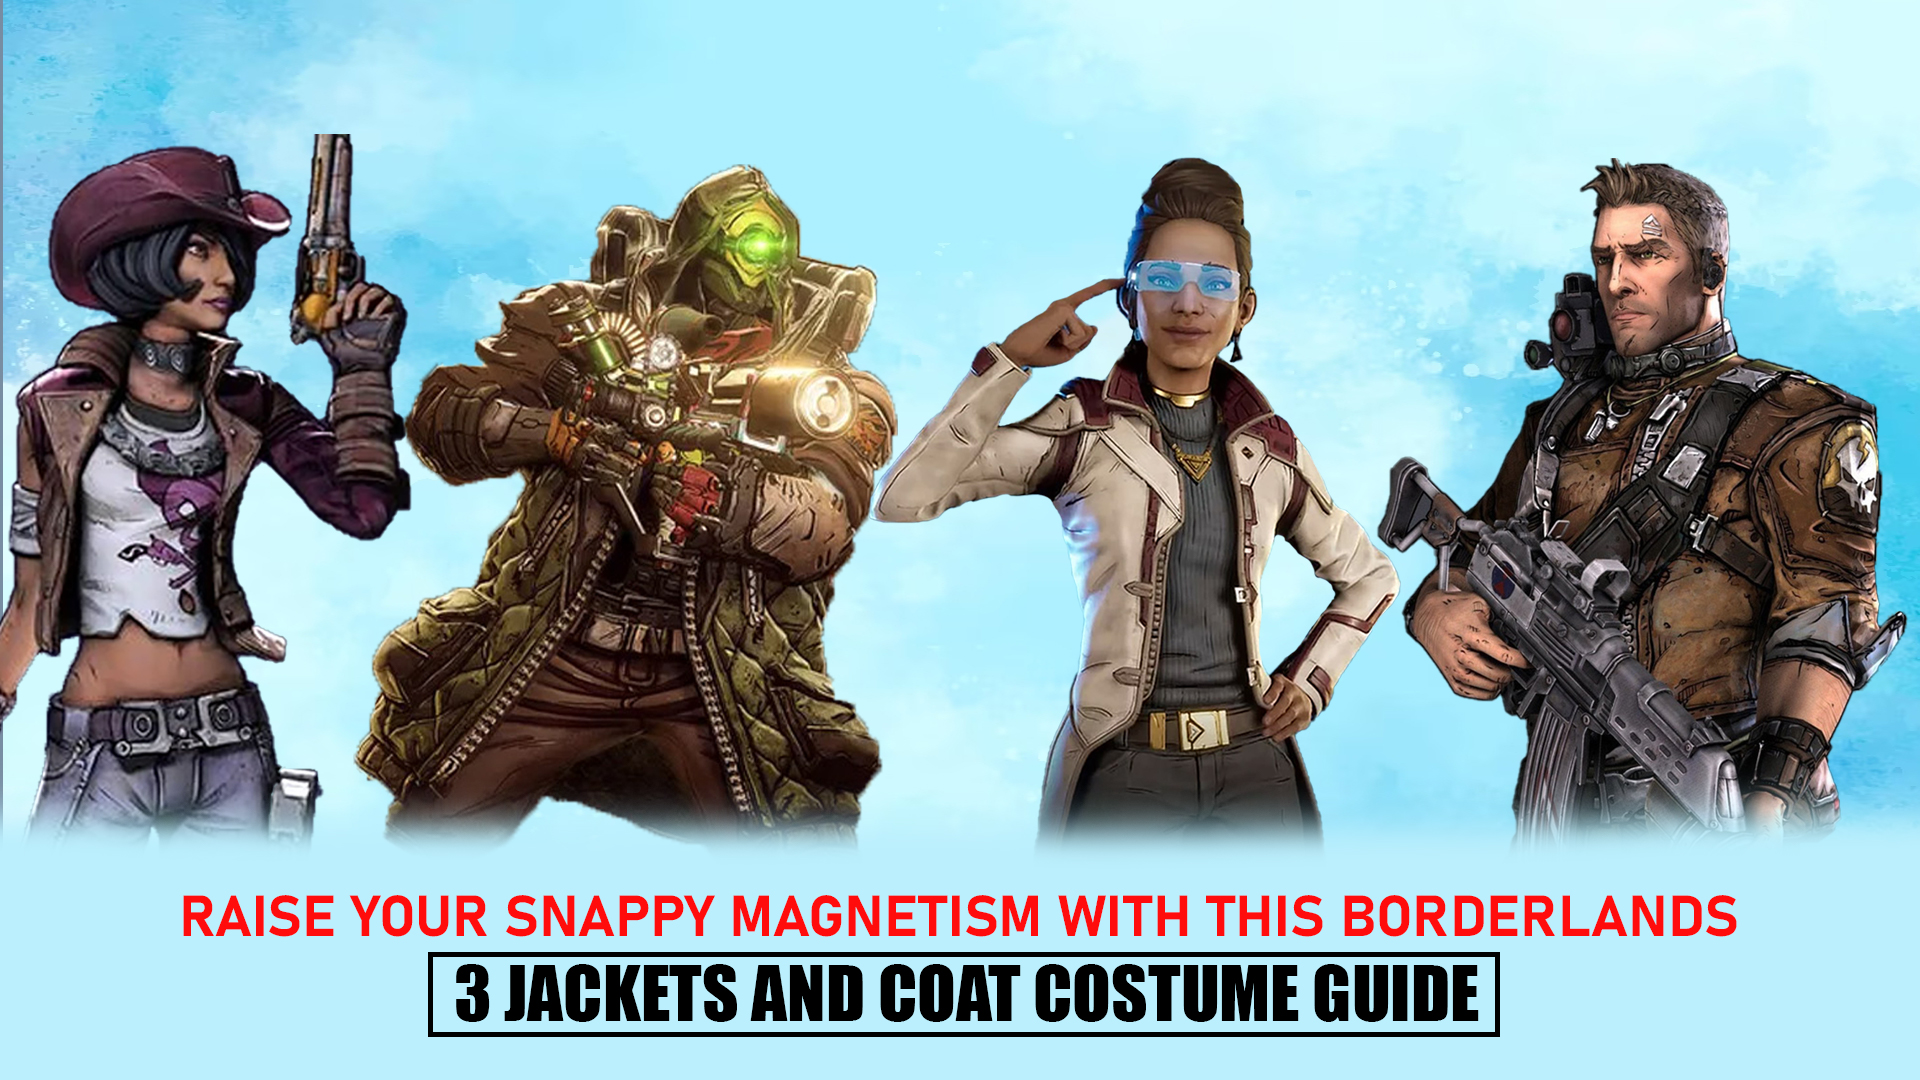 Raise Your Snappy Magnetism With This Borderlands 3 Jackets And Coat Costume Guide